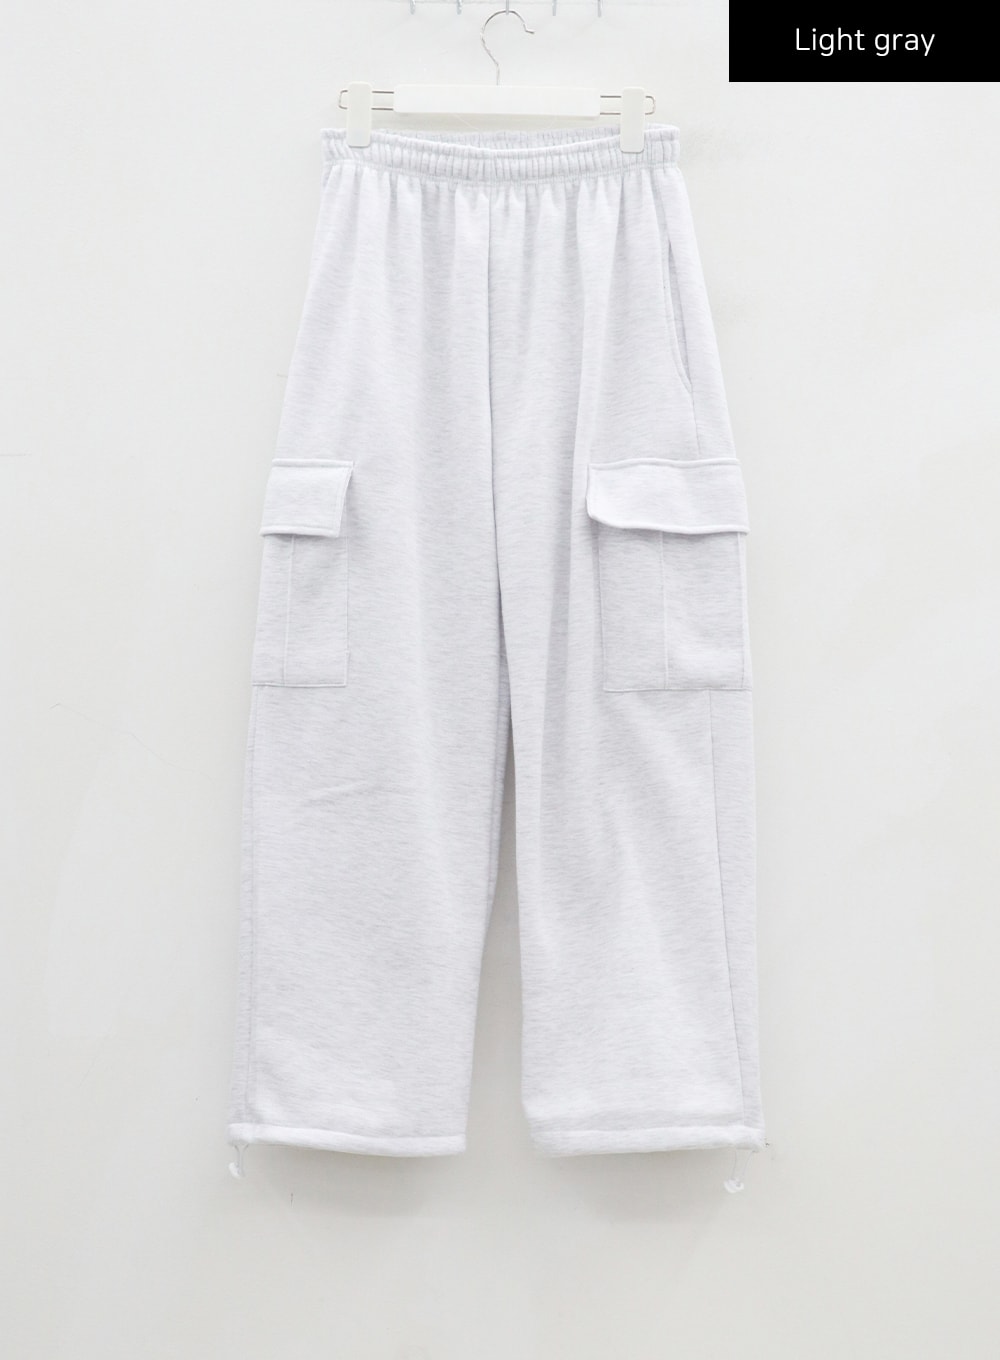 Louis Vuitton Mixed Material Track Pants